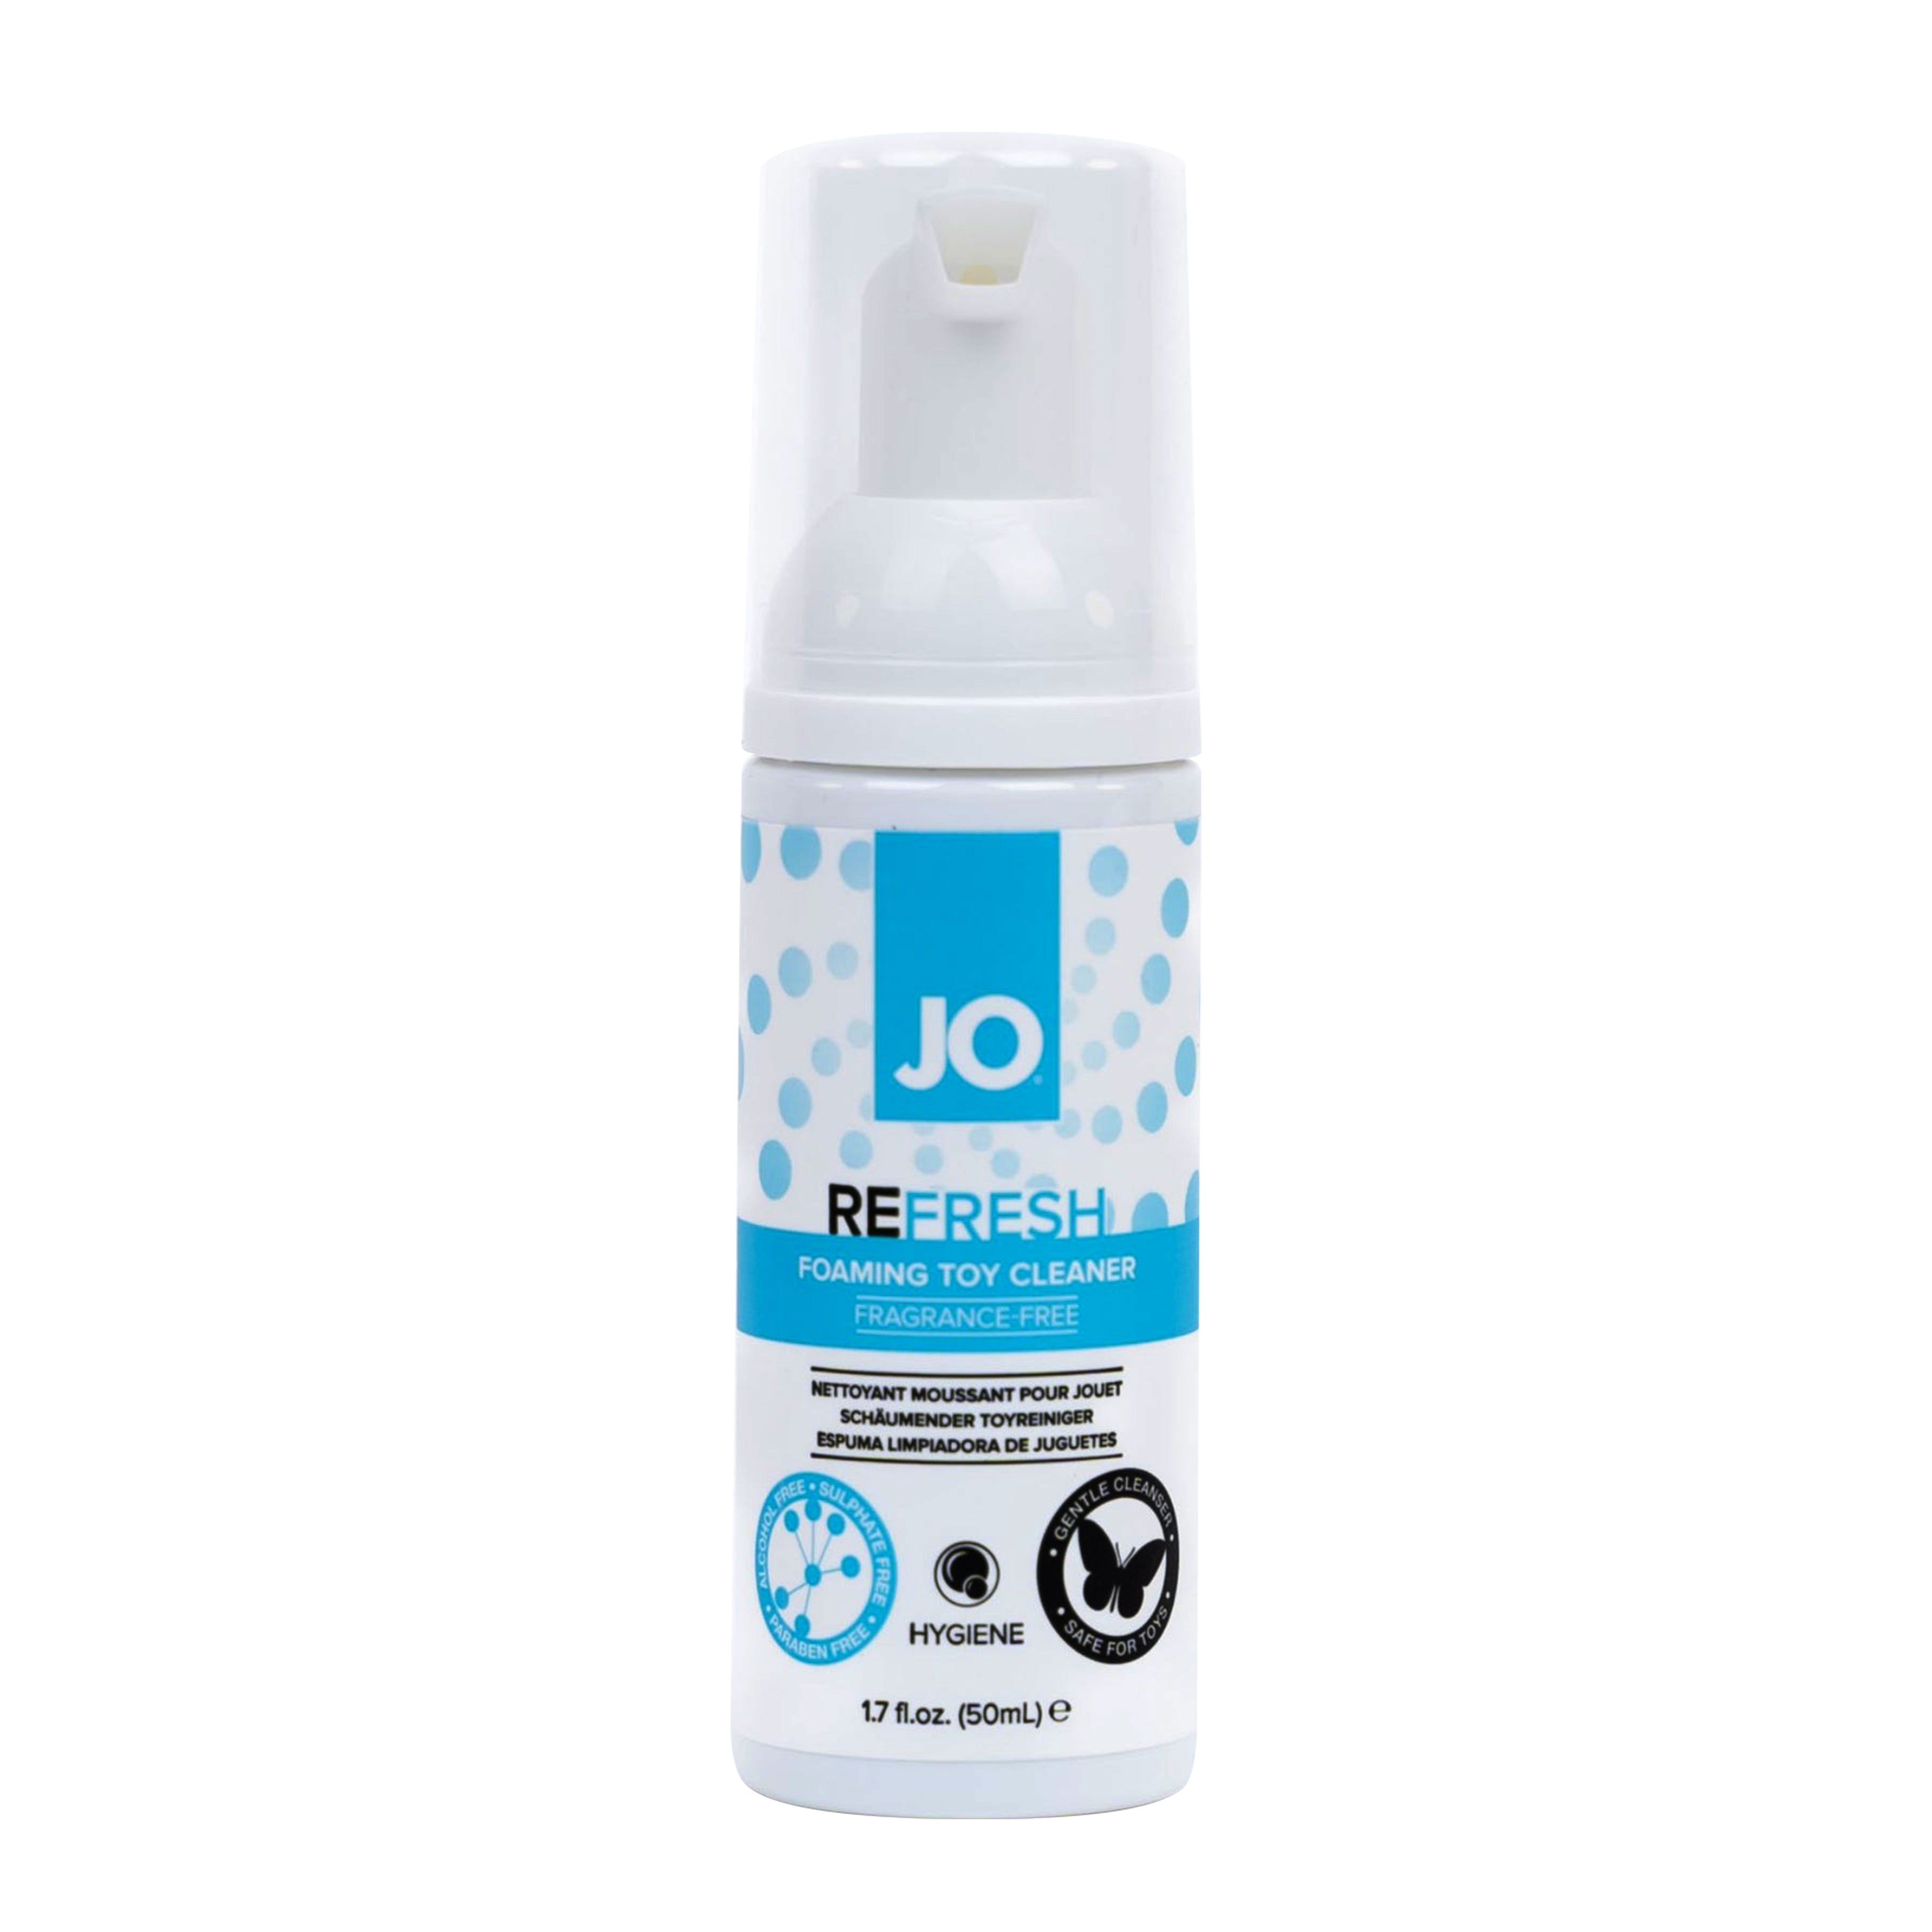 Jo Refresh Foaming Toy Cleaner Travel Size